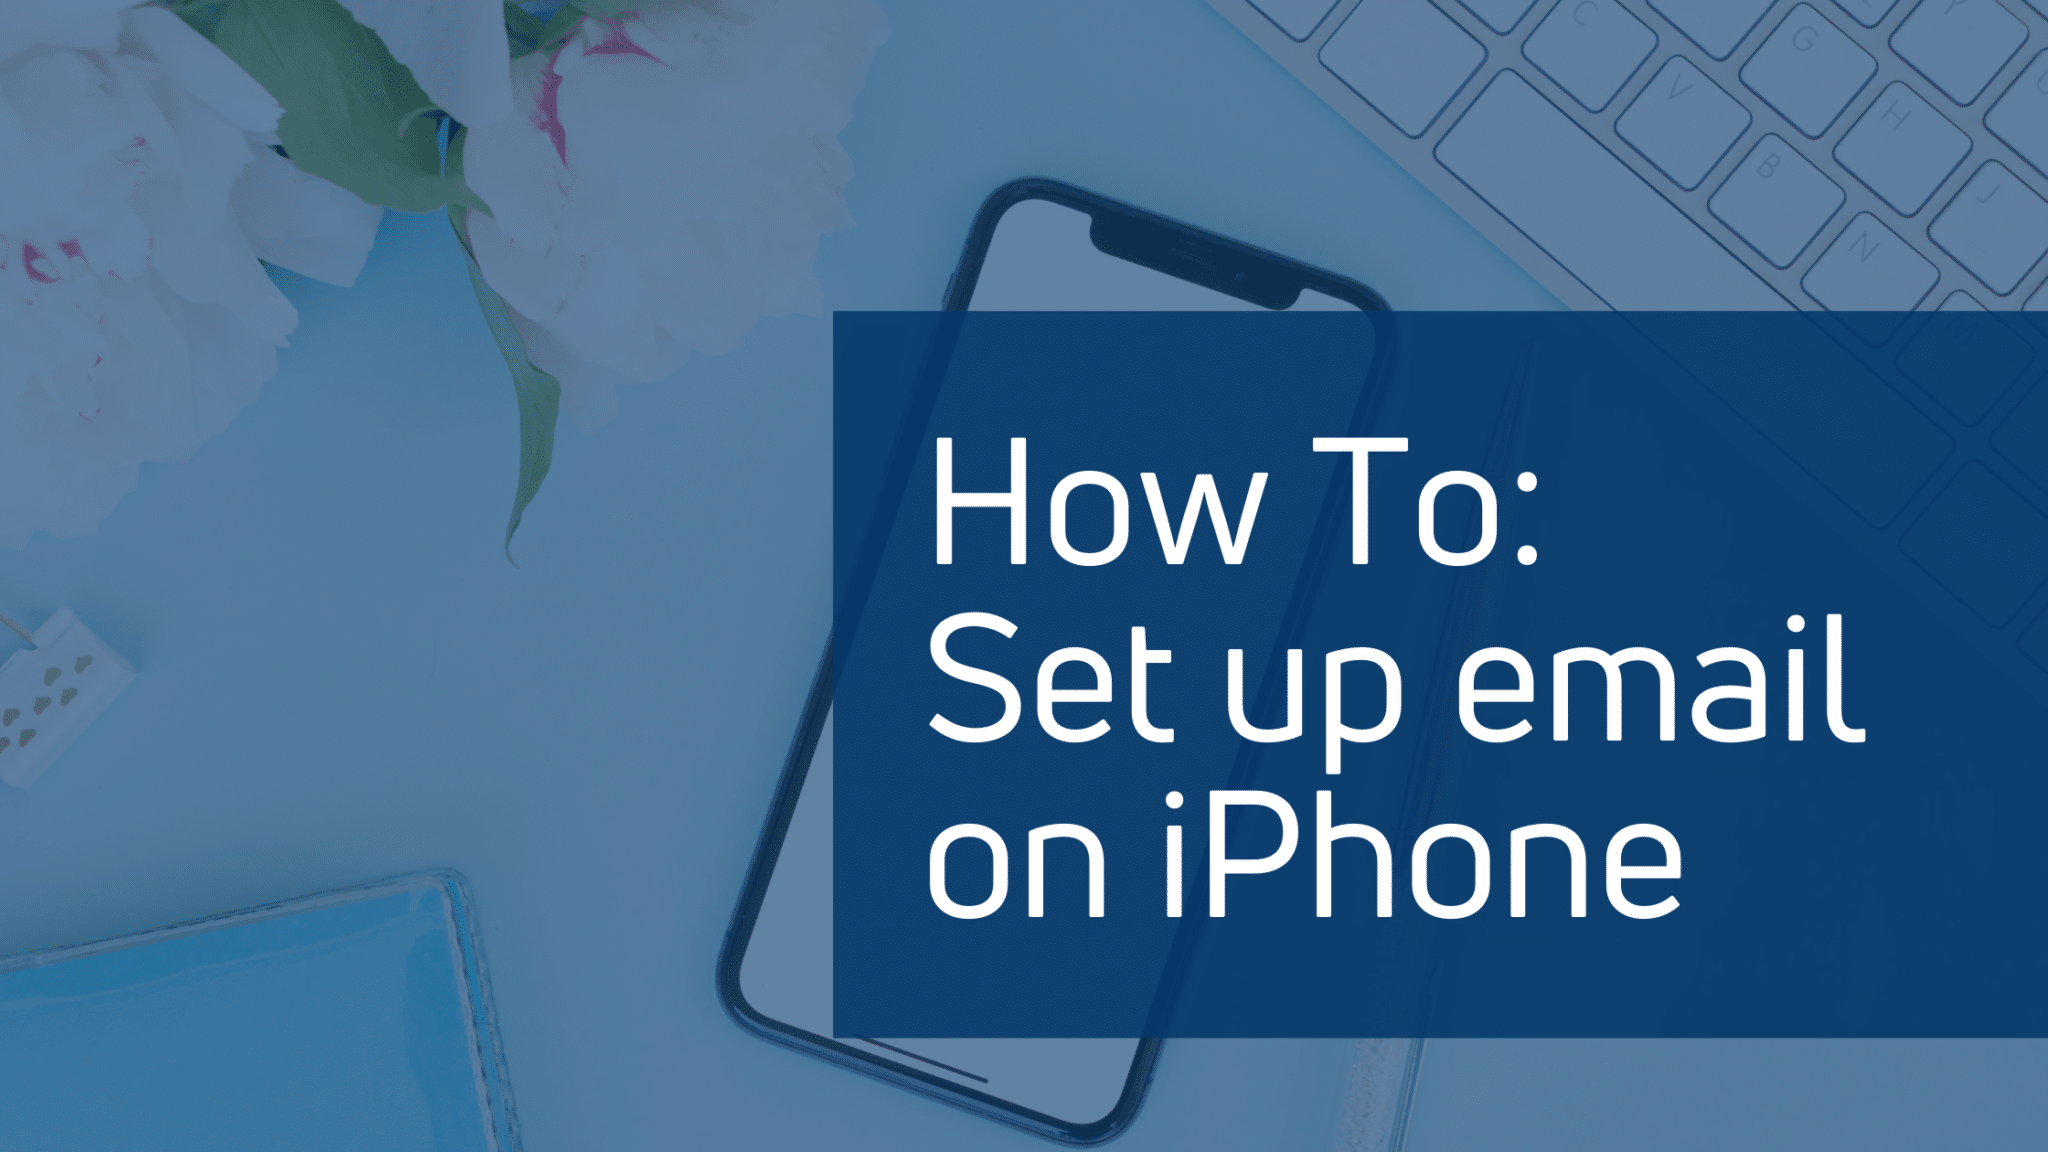 The image shows instructions on how to configure an email account on an iPhone.